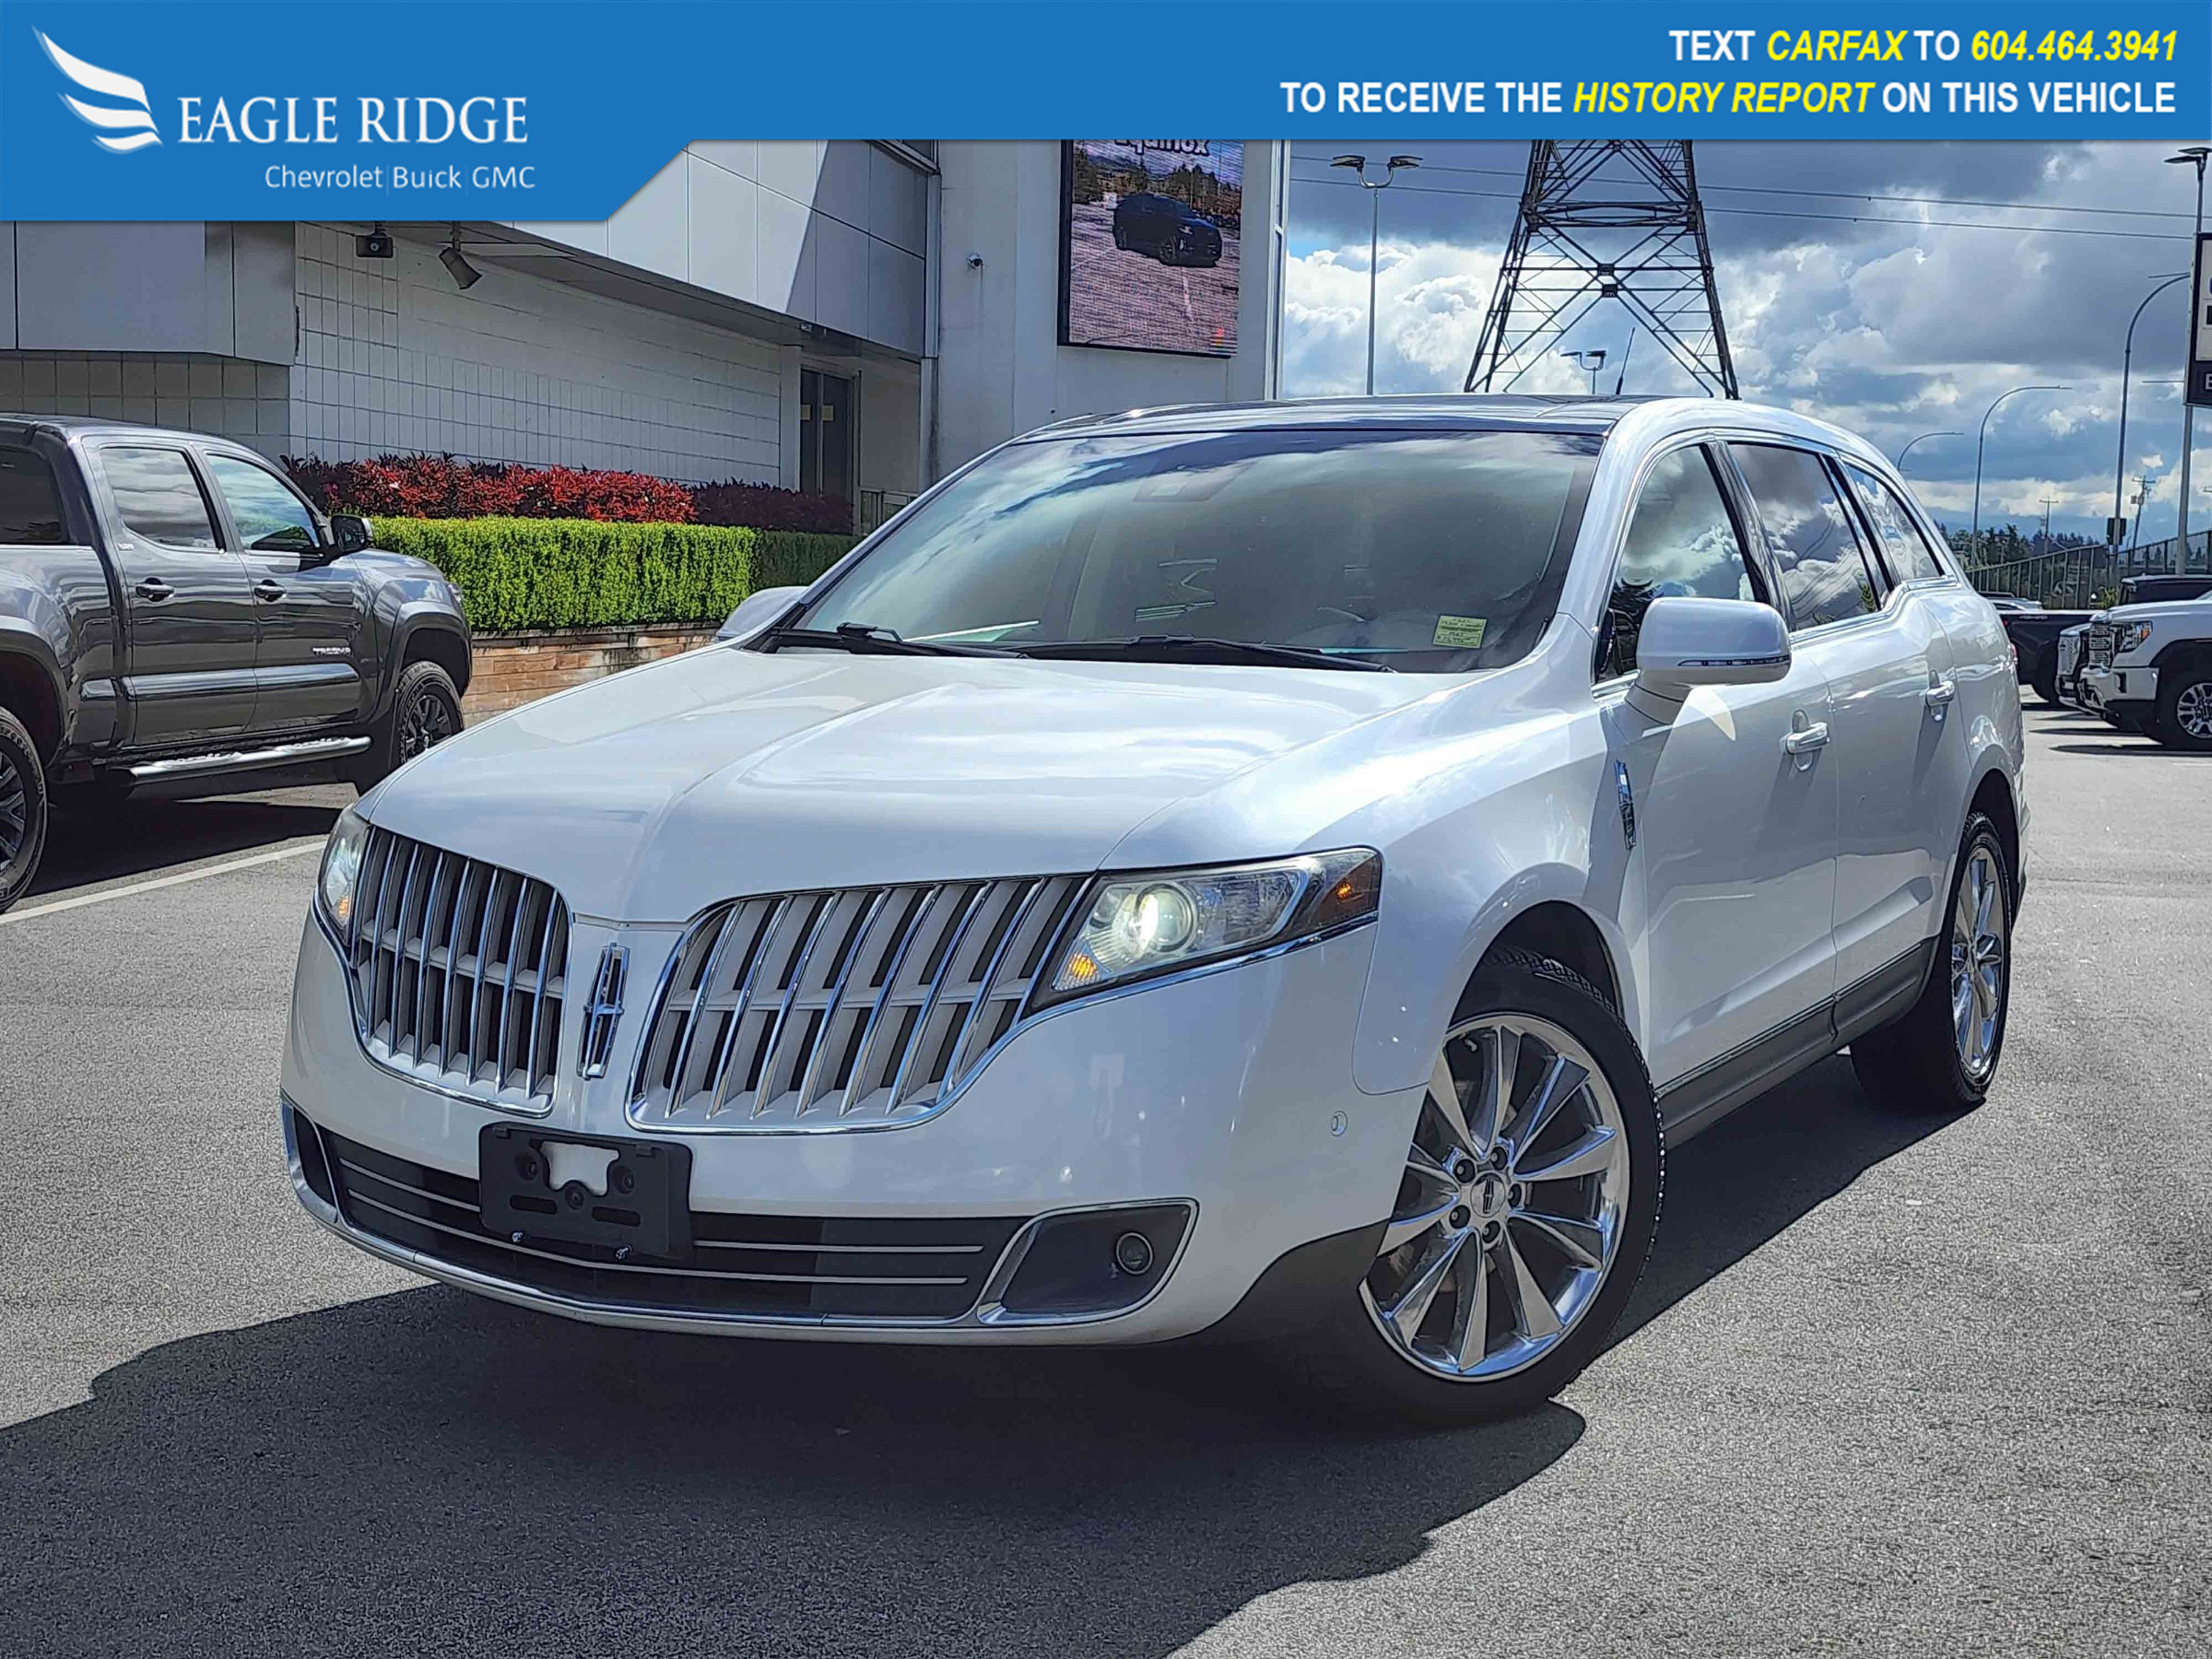 2011 Lincoln MKT EcoBoost AWD, Memory seat, Pedal memory, Rear Park